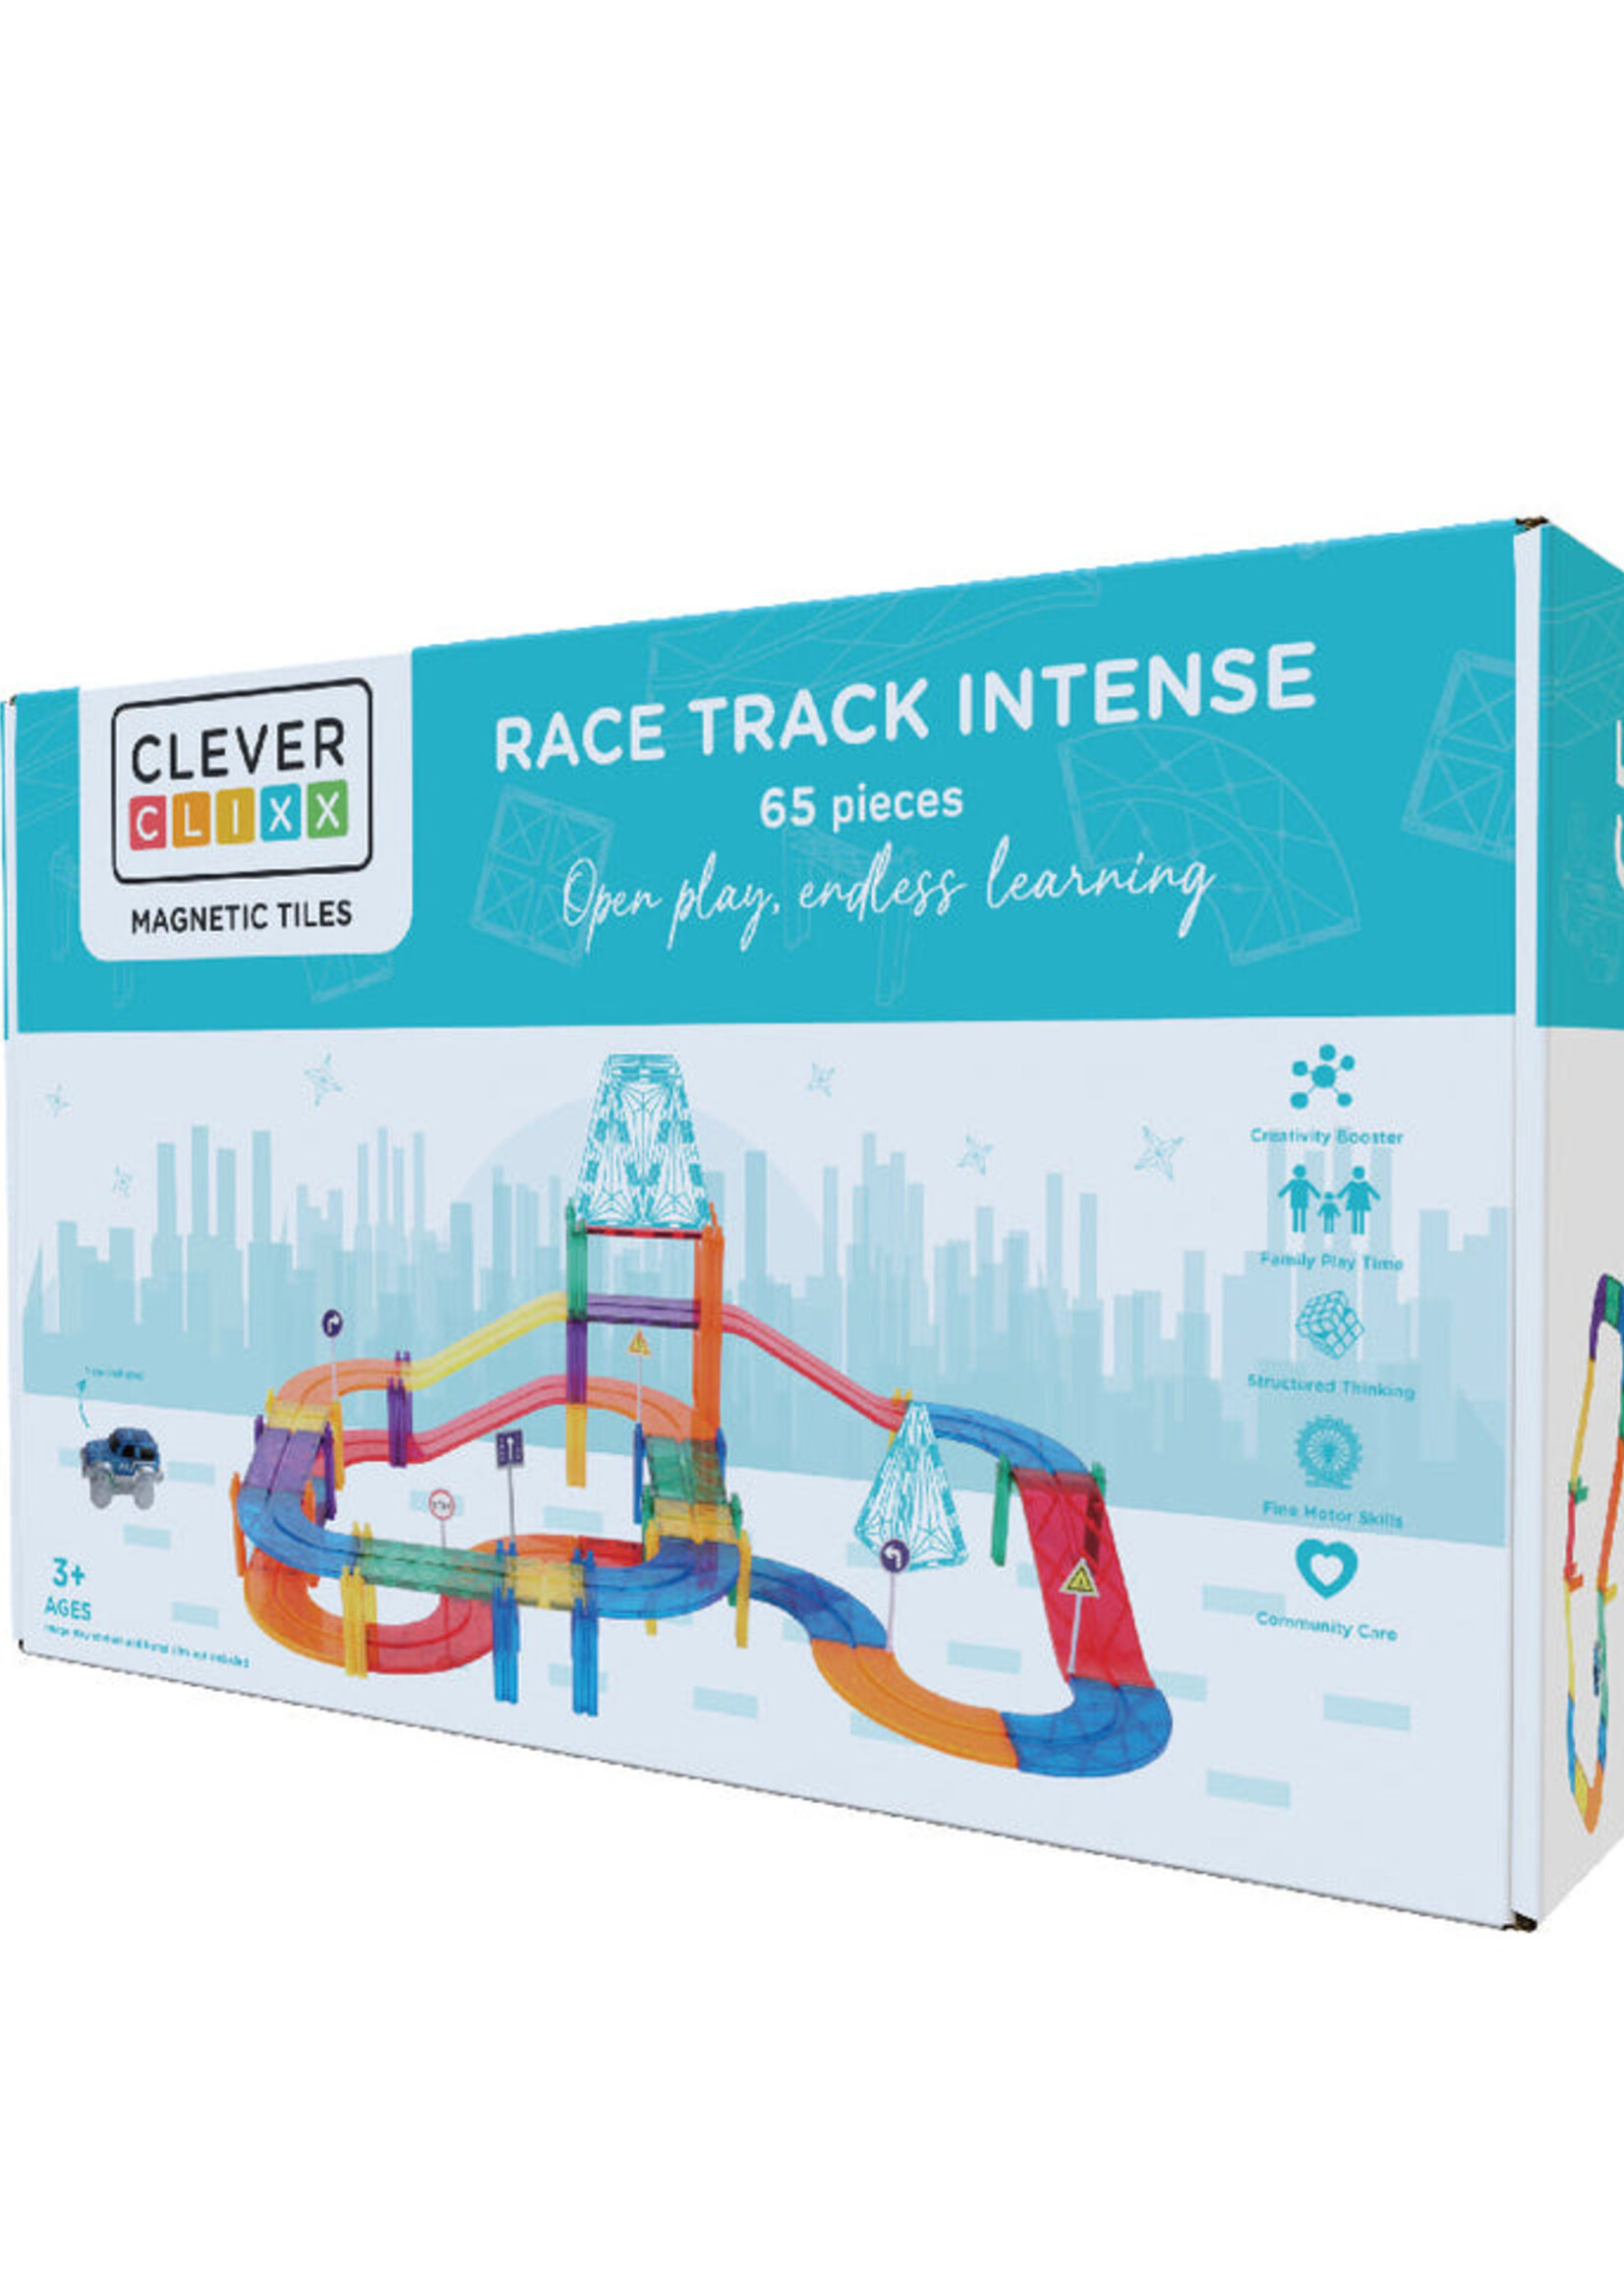 Cleverclixx Cleverclixx | Race Track  Intense - 65 pieces